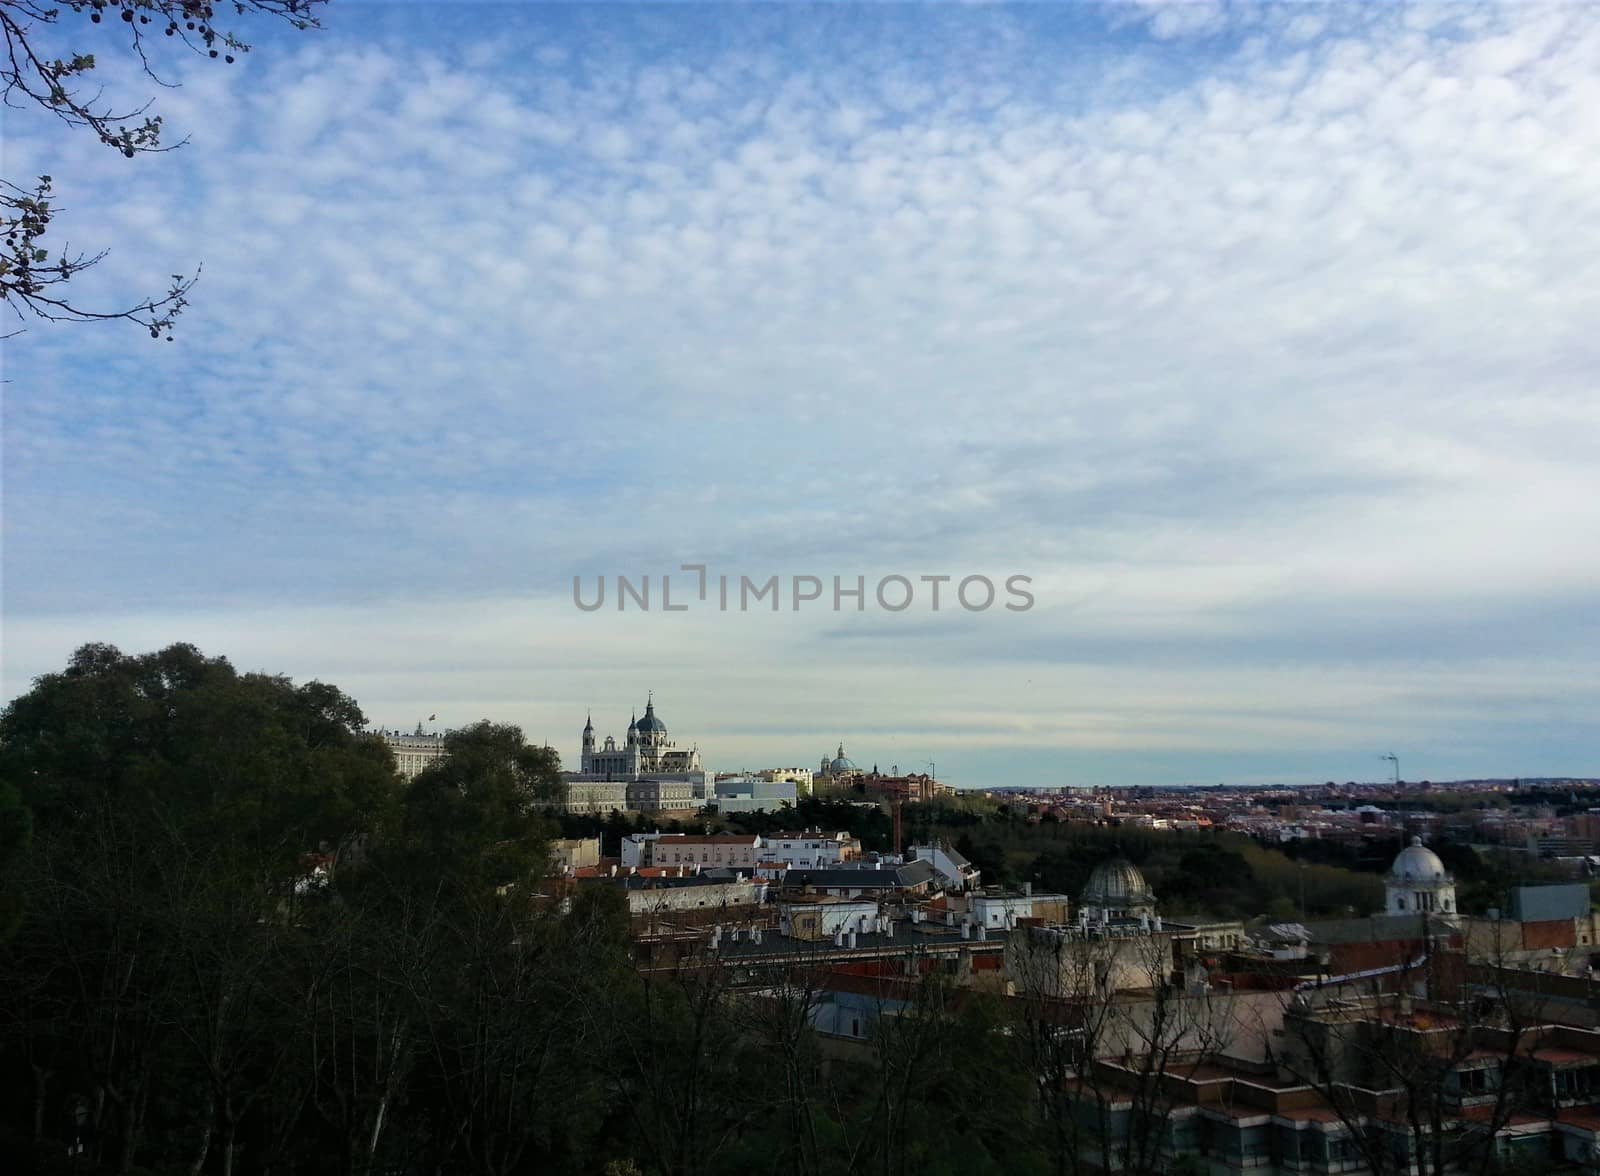 Madrid Panorama with Almudena cathedral on a hill